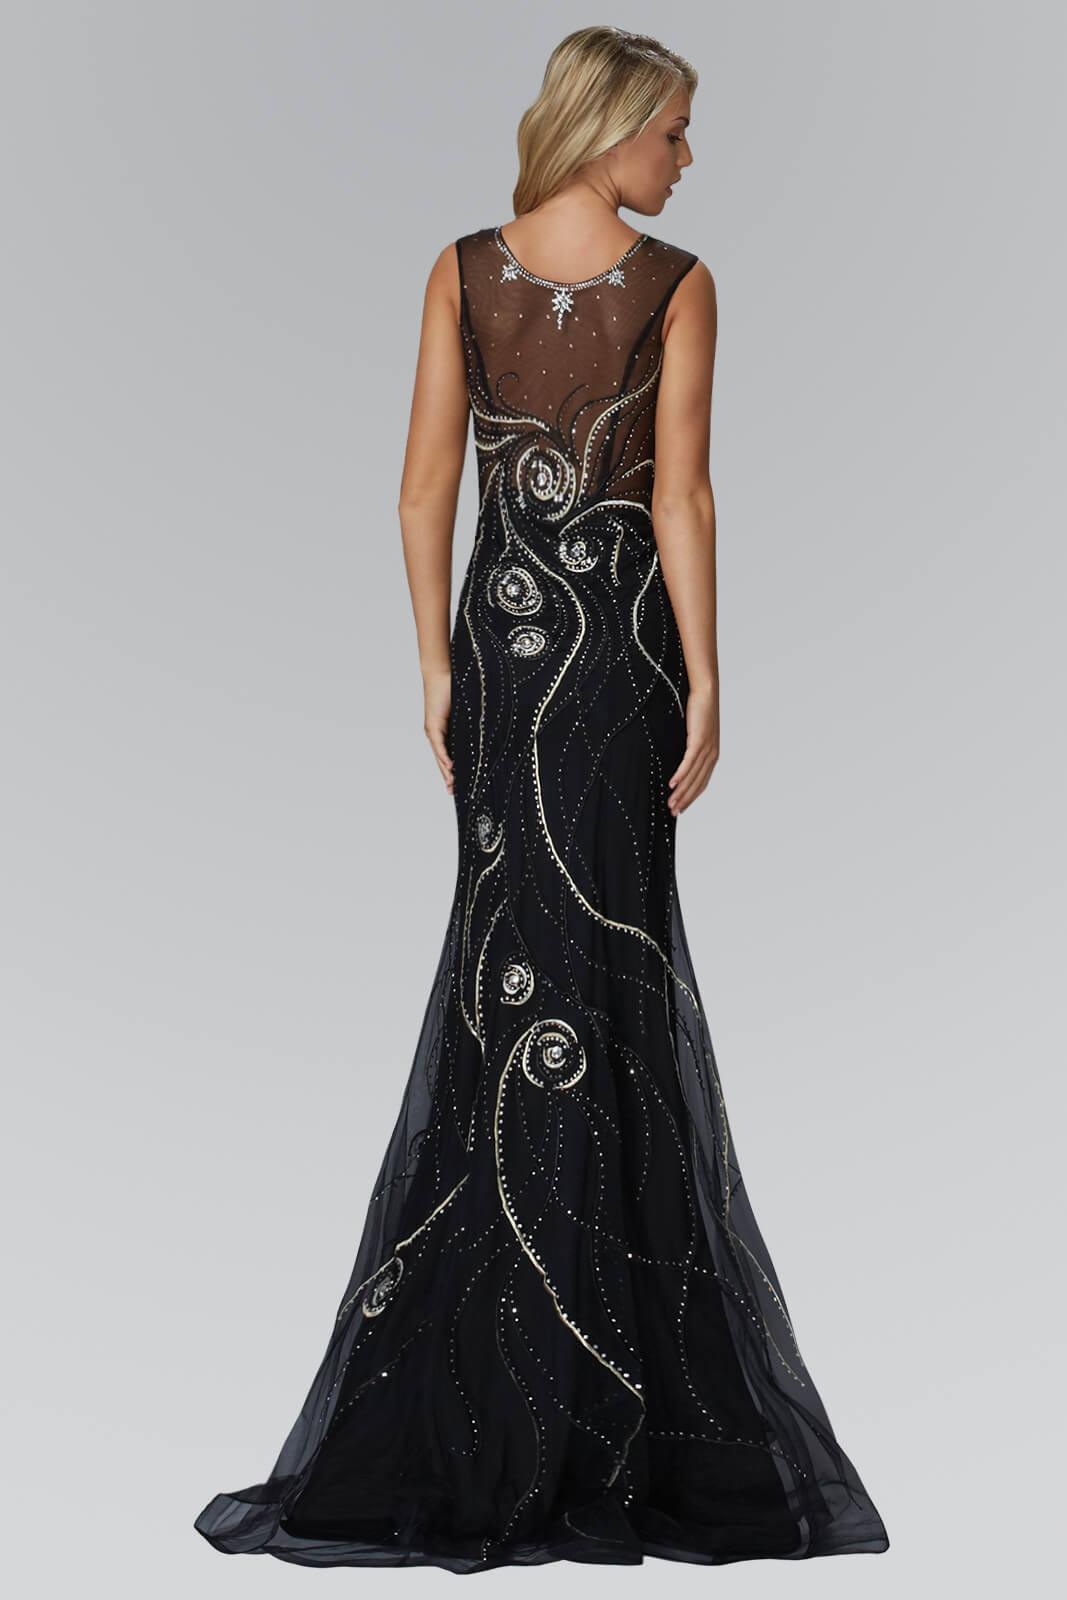 Prom Long Sequins Dress Mermaid Evening Gown Black